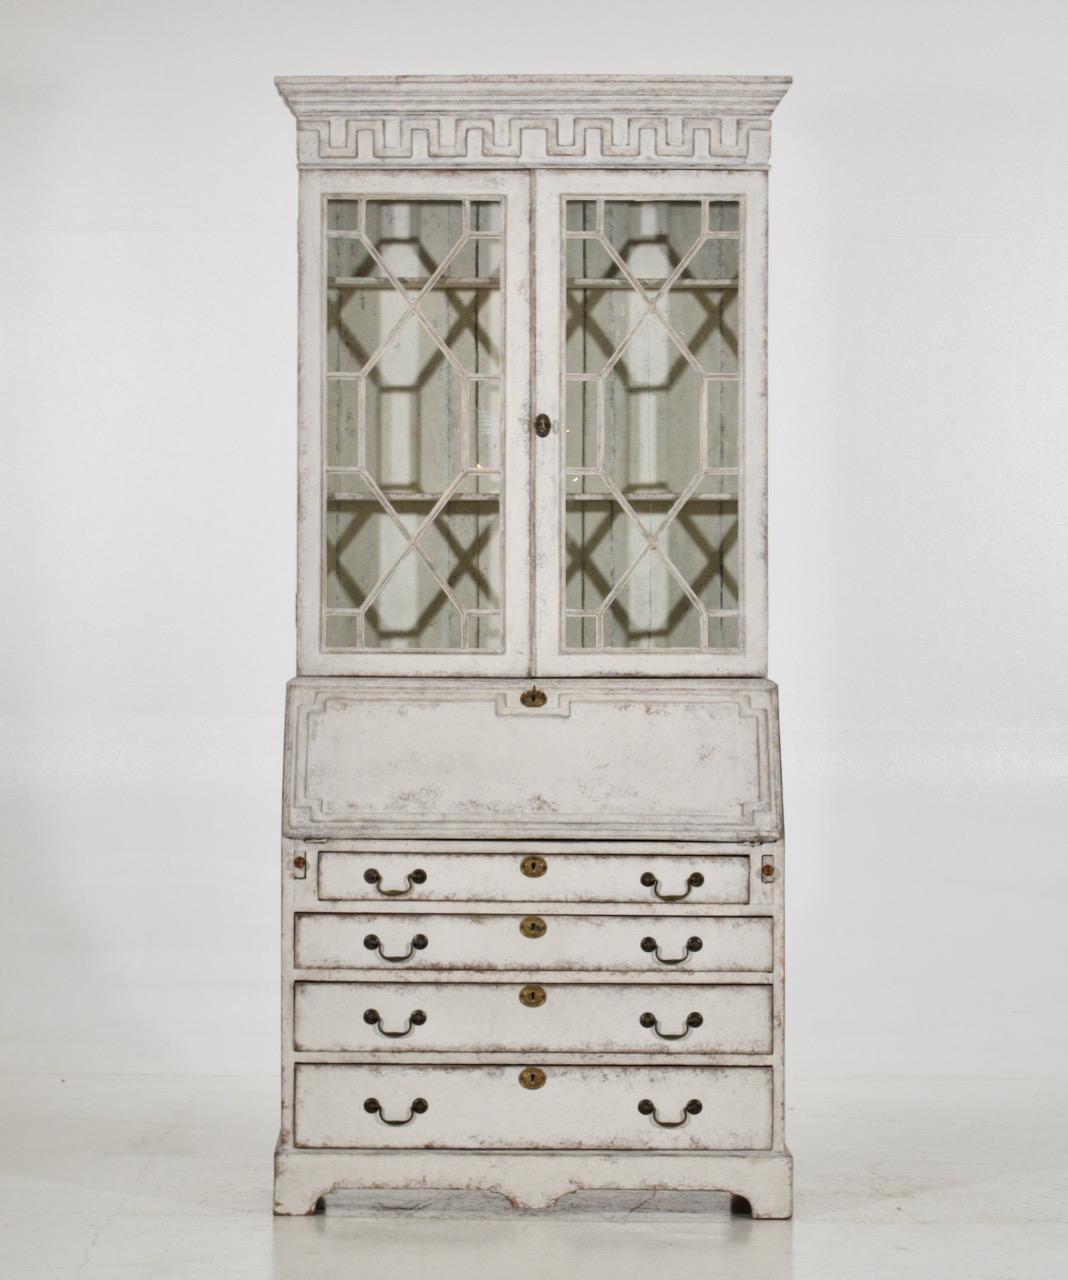 European two-part vitrine cabinet with Fine carvings, circa 1790.